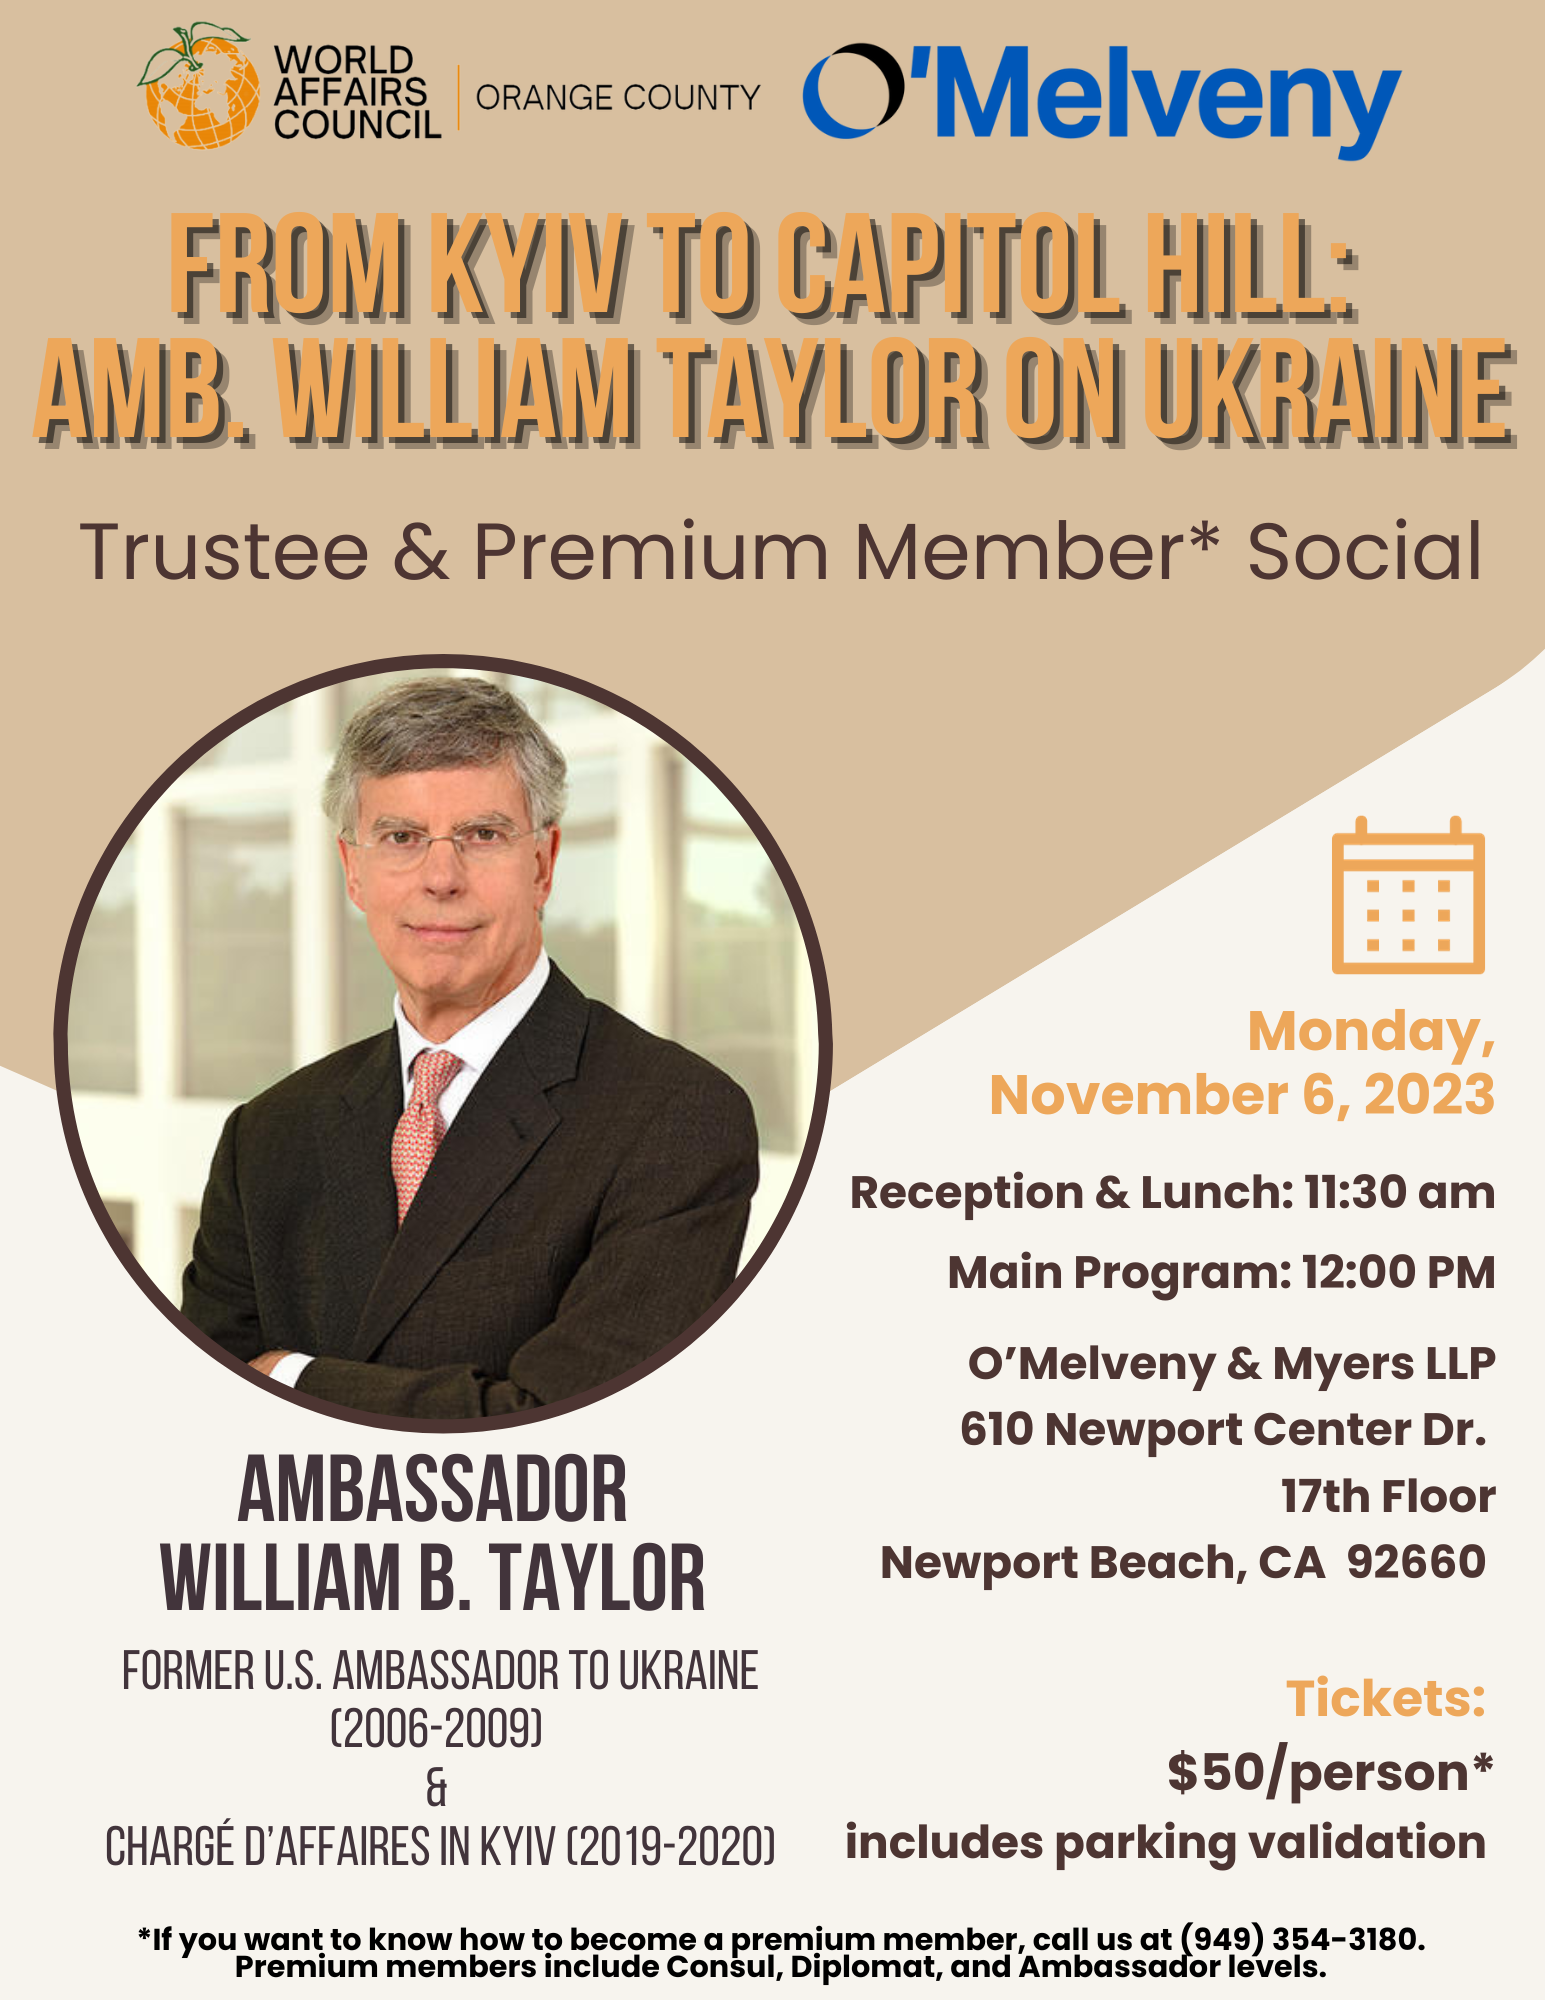 From Kyiv to Capitol Hill: Ambassador William Taylor on Ukraine